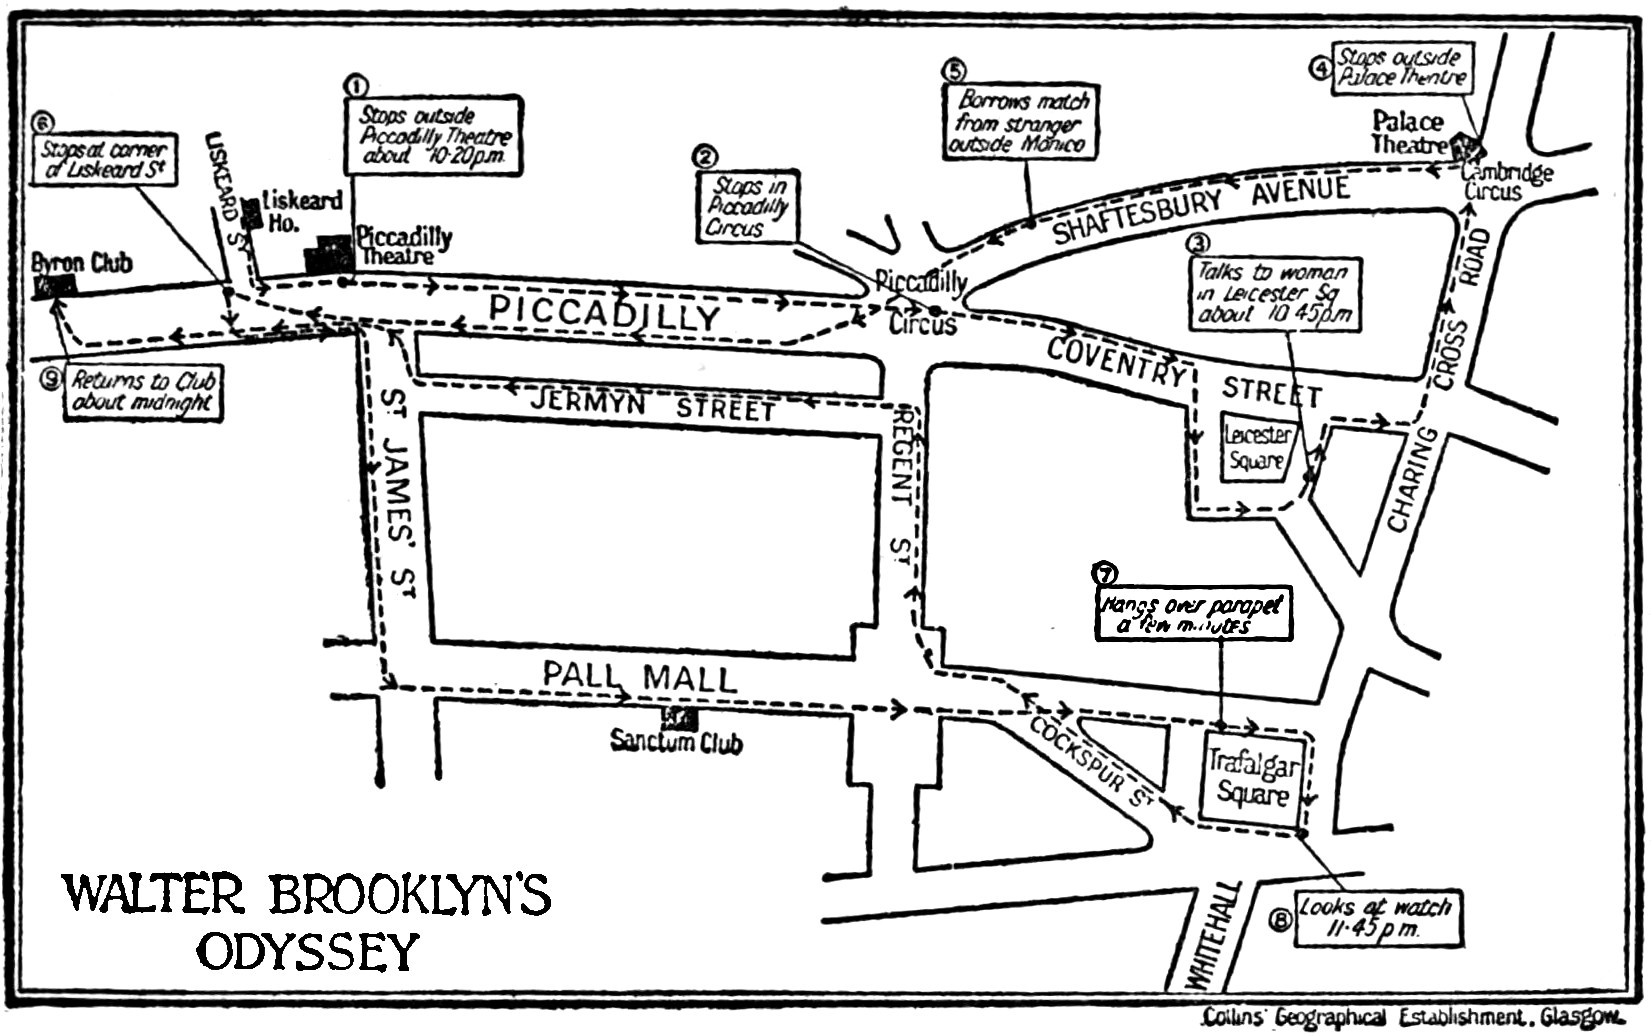 A map of some streets in London, entitled “Walter Brooklyn’s Odyssey.” A dotted line traces a path from Liskeard House to Byron Club that meanders along a dozen streets, including Piccadilly, Charing Cross Road, Jermyn Street, Pall Mall, and Liskeard Street. Nine different points on the path are labelled indicating points where Walter Brooklyn engaged in some activity.